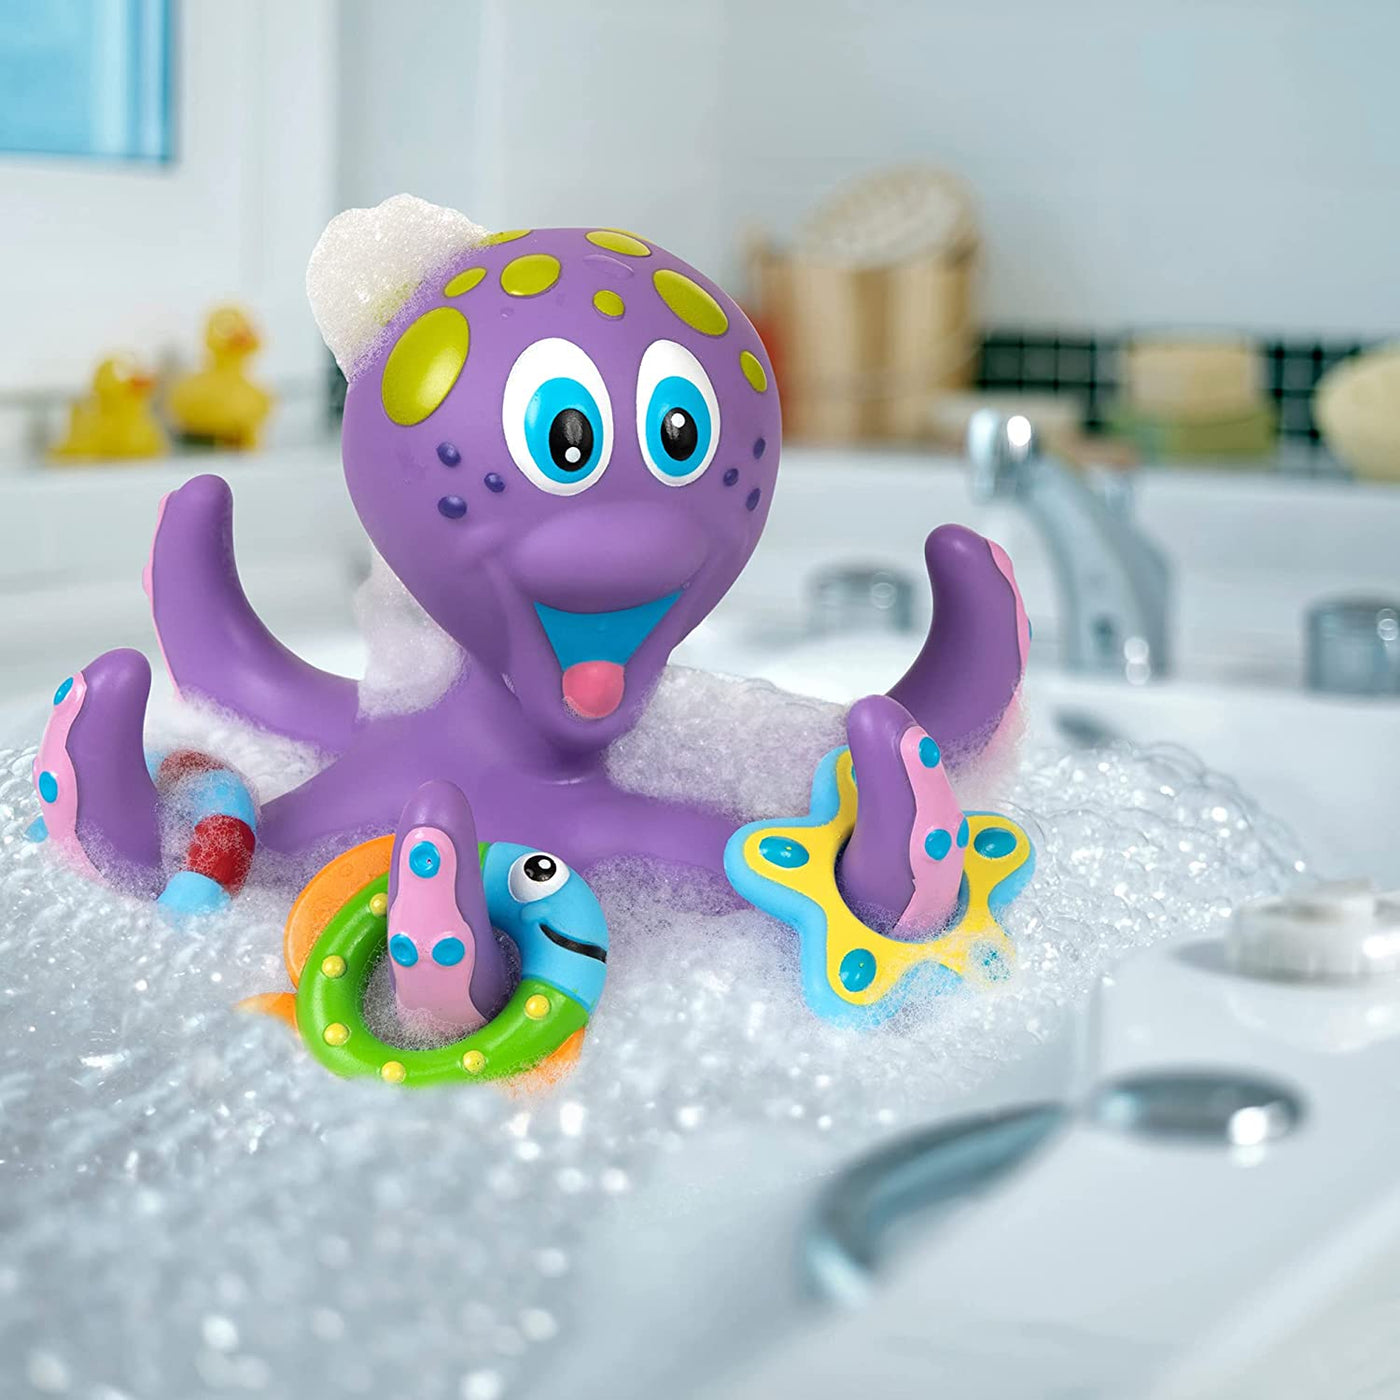 3 Rings Interactive Bath Toy